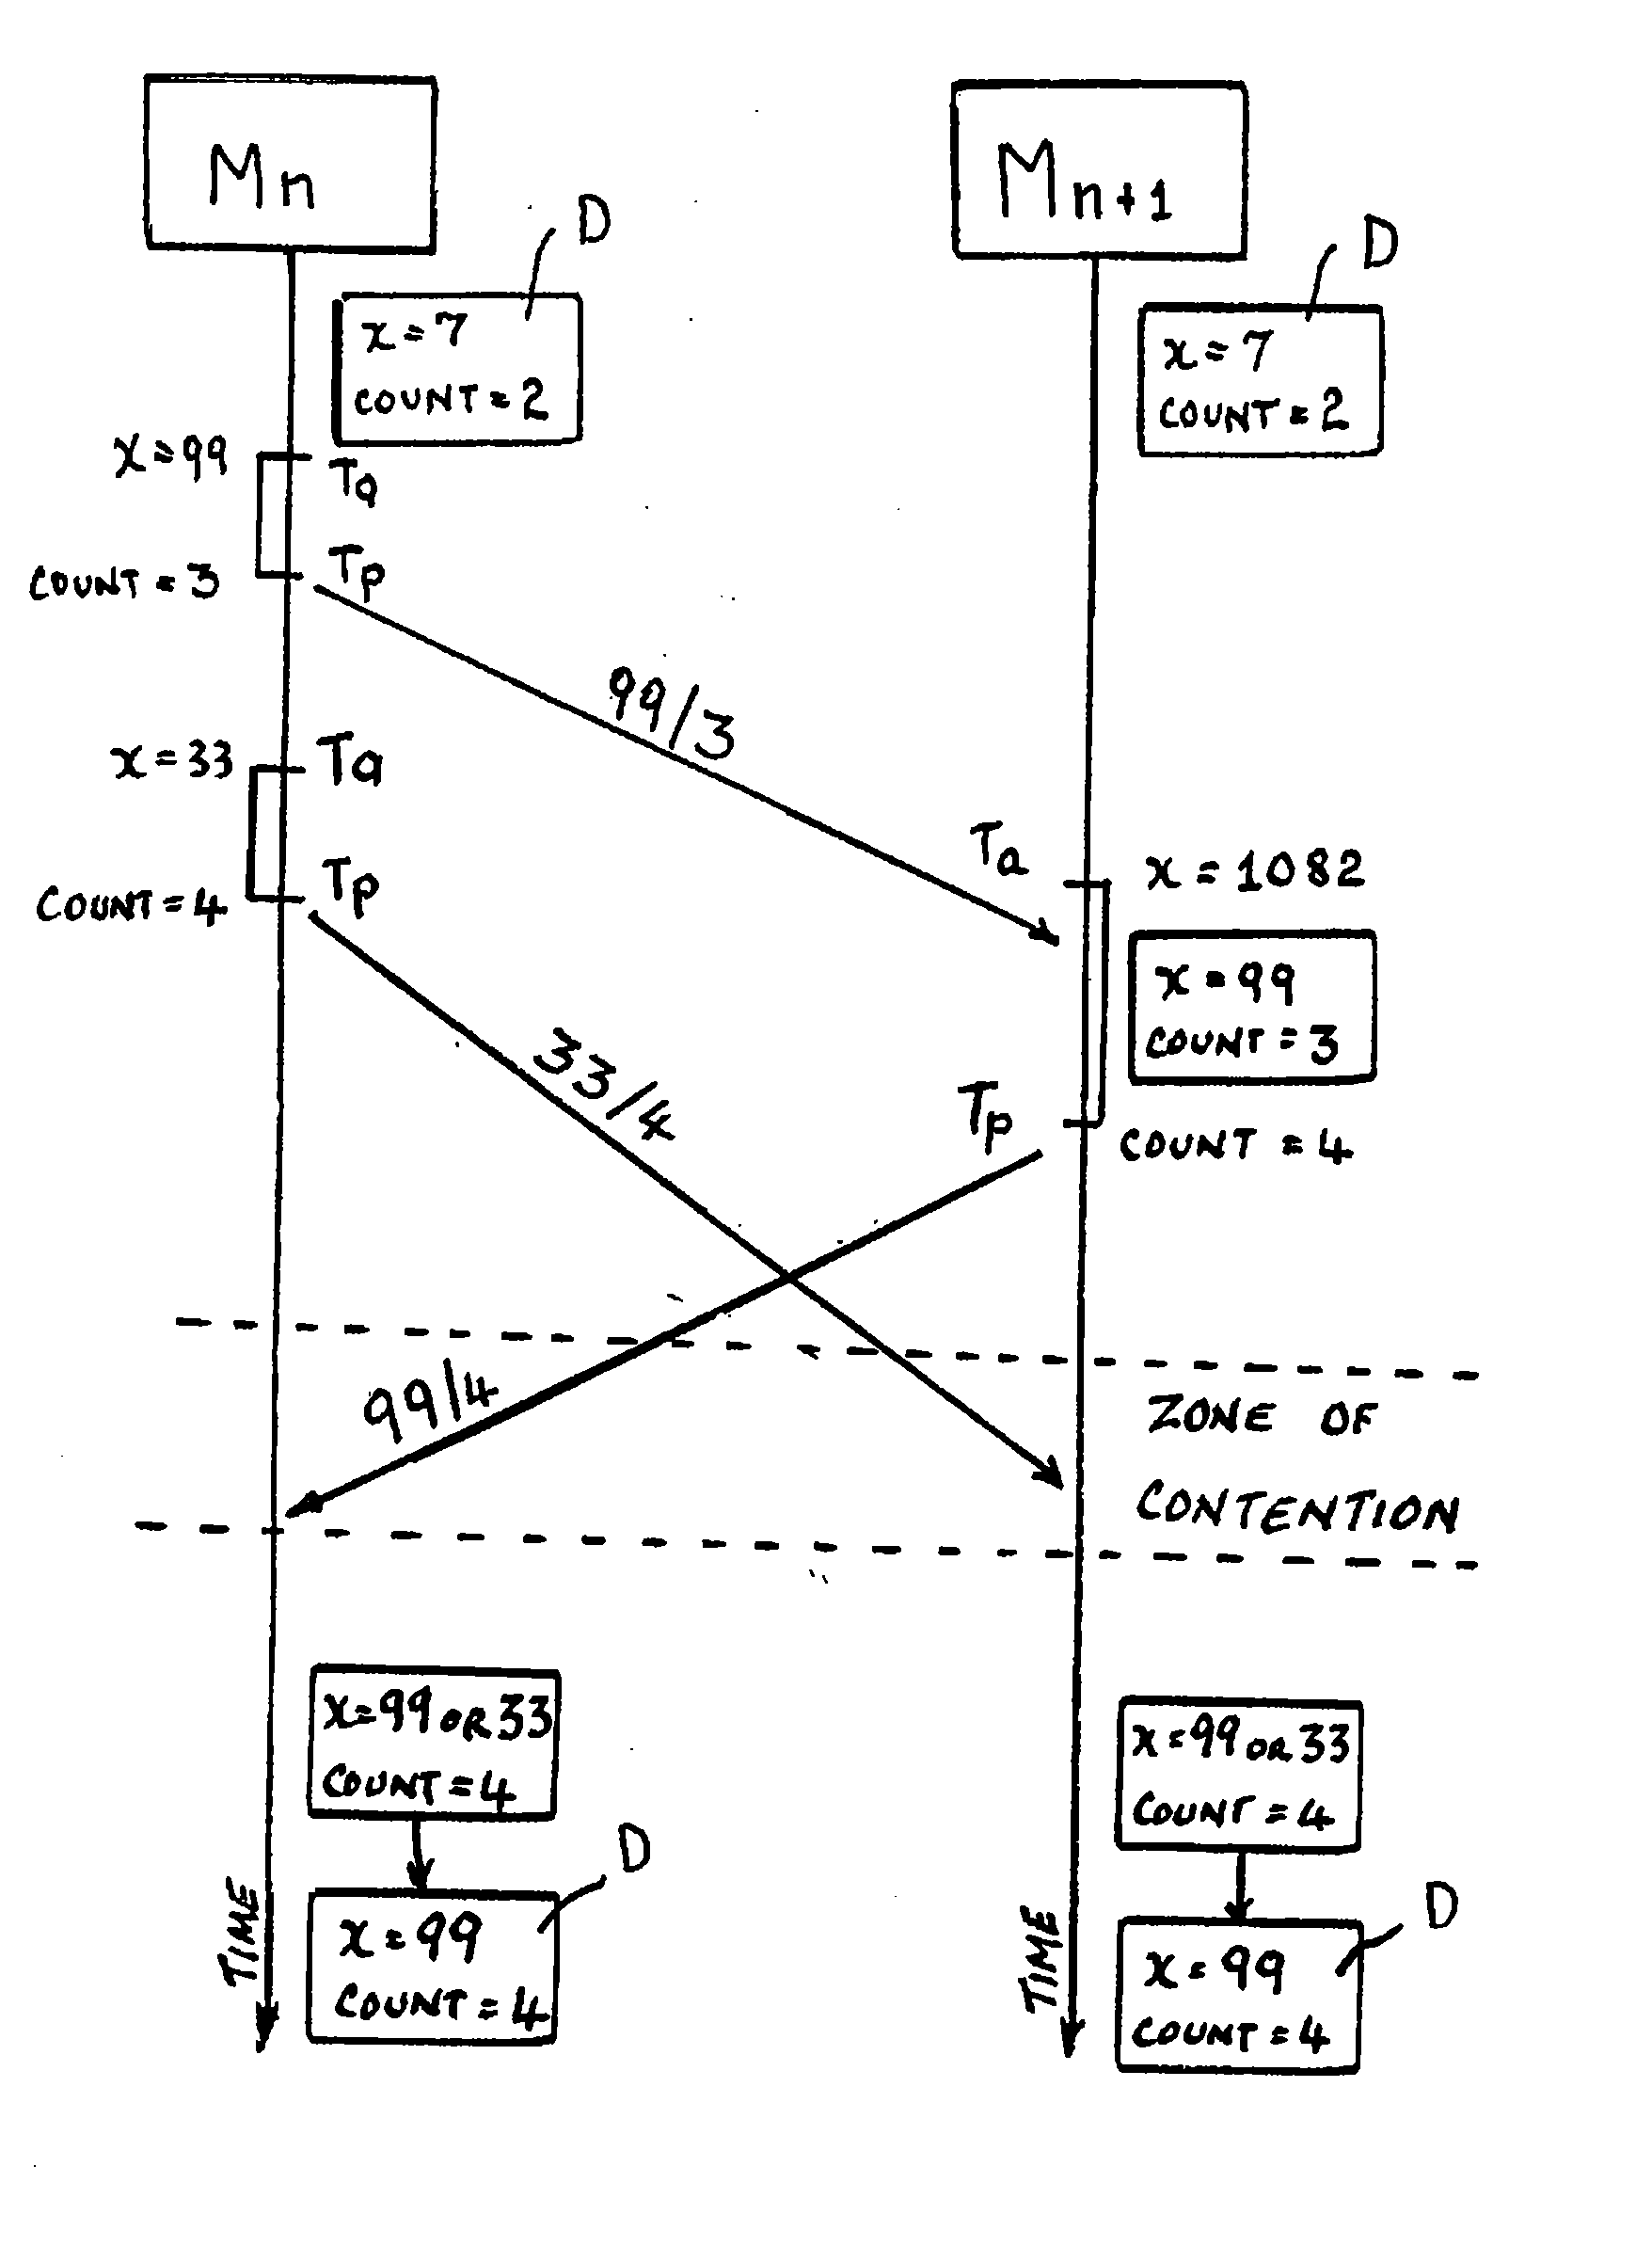 Computer Architecture And Method Of Operation for Multi-Computer Distributed Processing Having Redundant Array Of Independent Systems With Replicated Memory And Code Striping